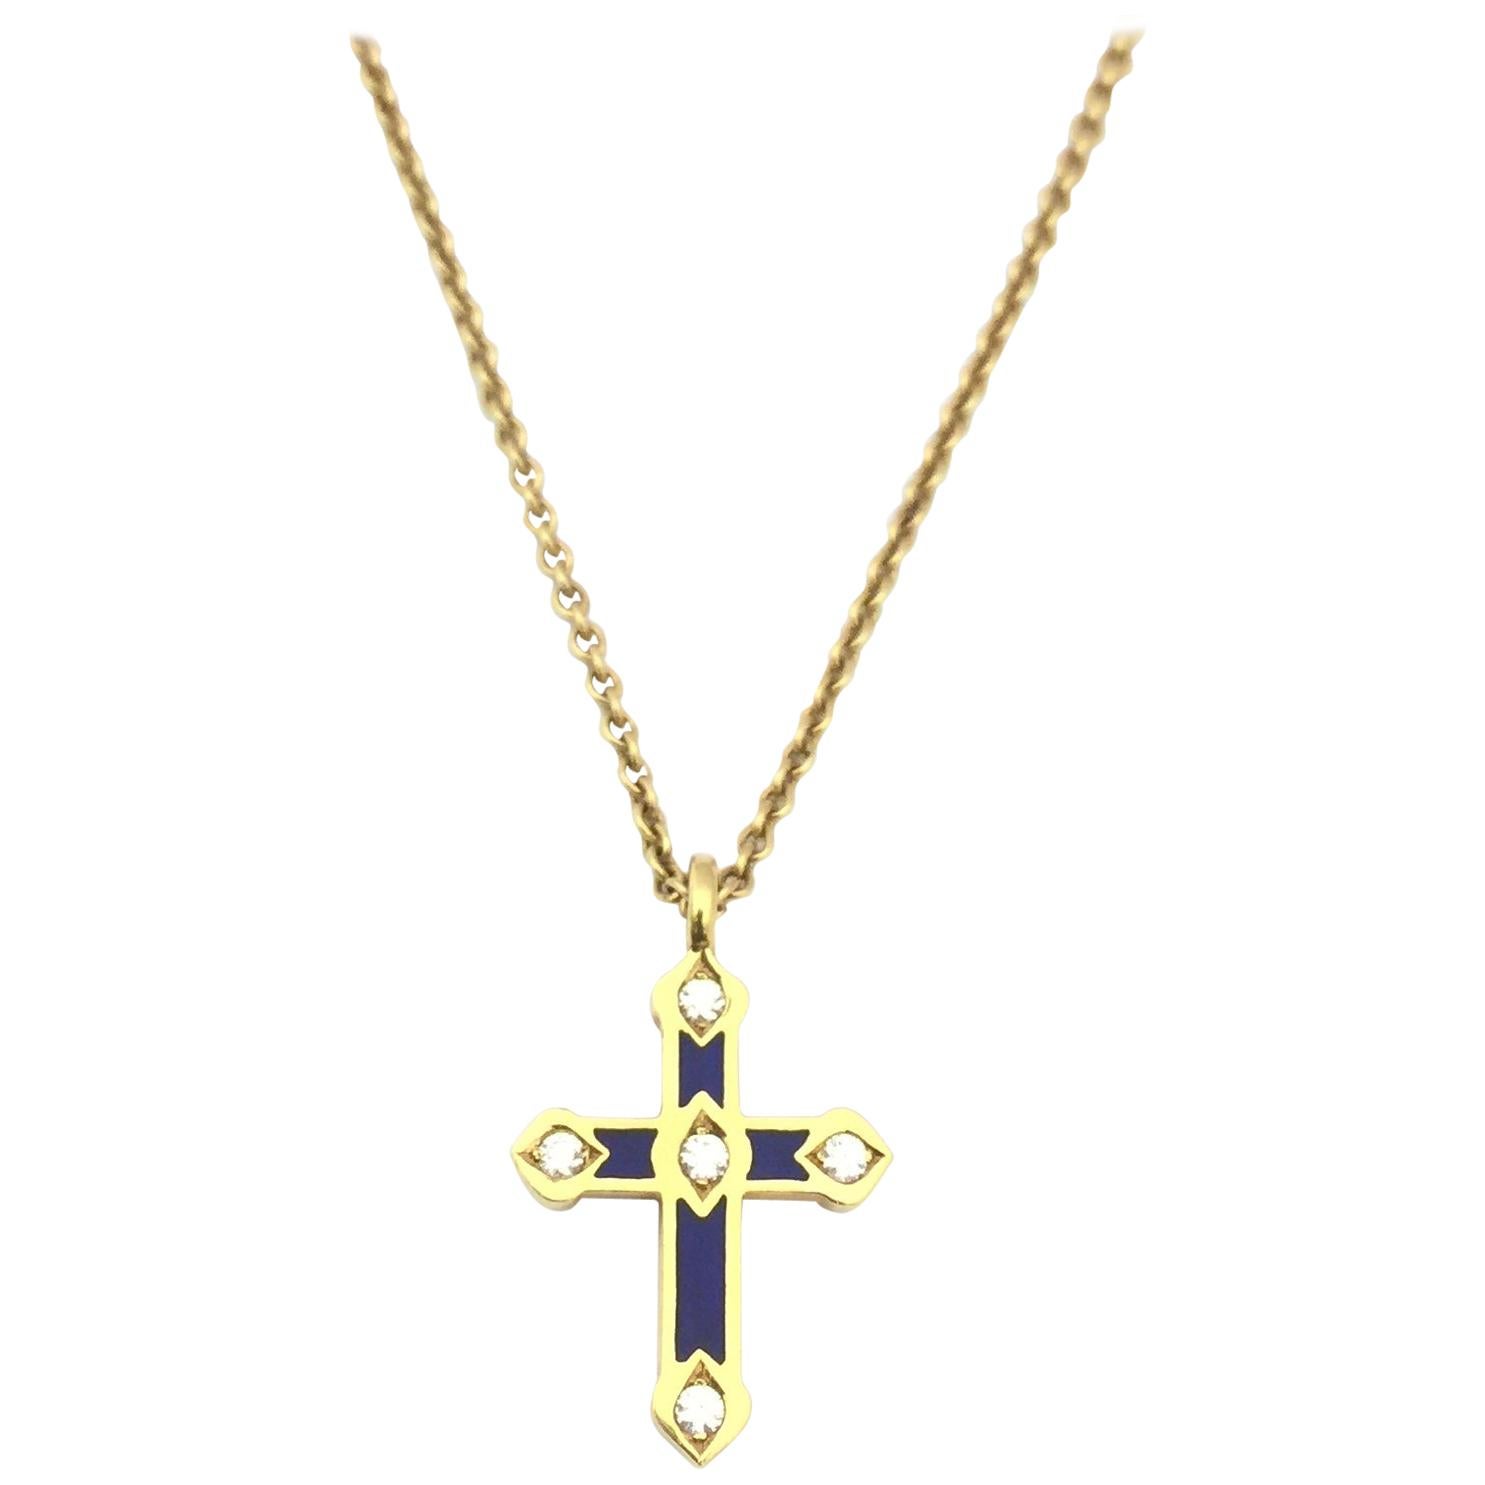 Modern Faberge Cross Necklace F2241BL